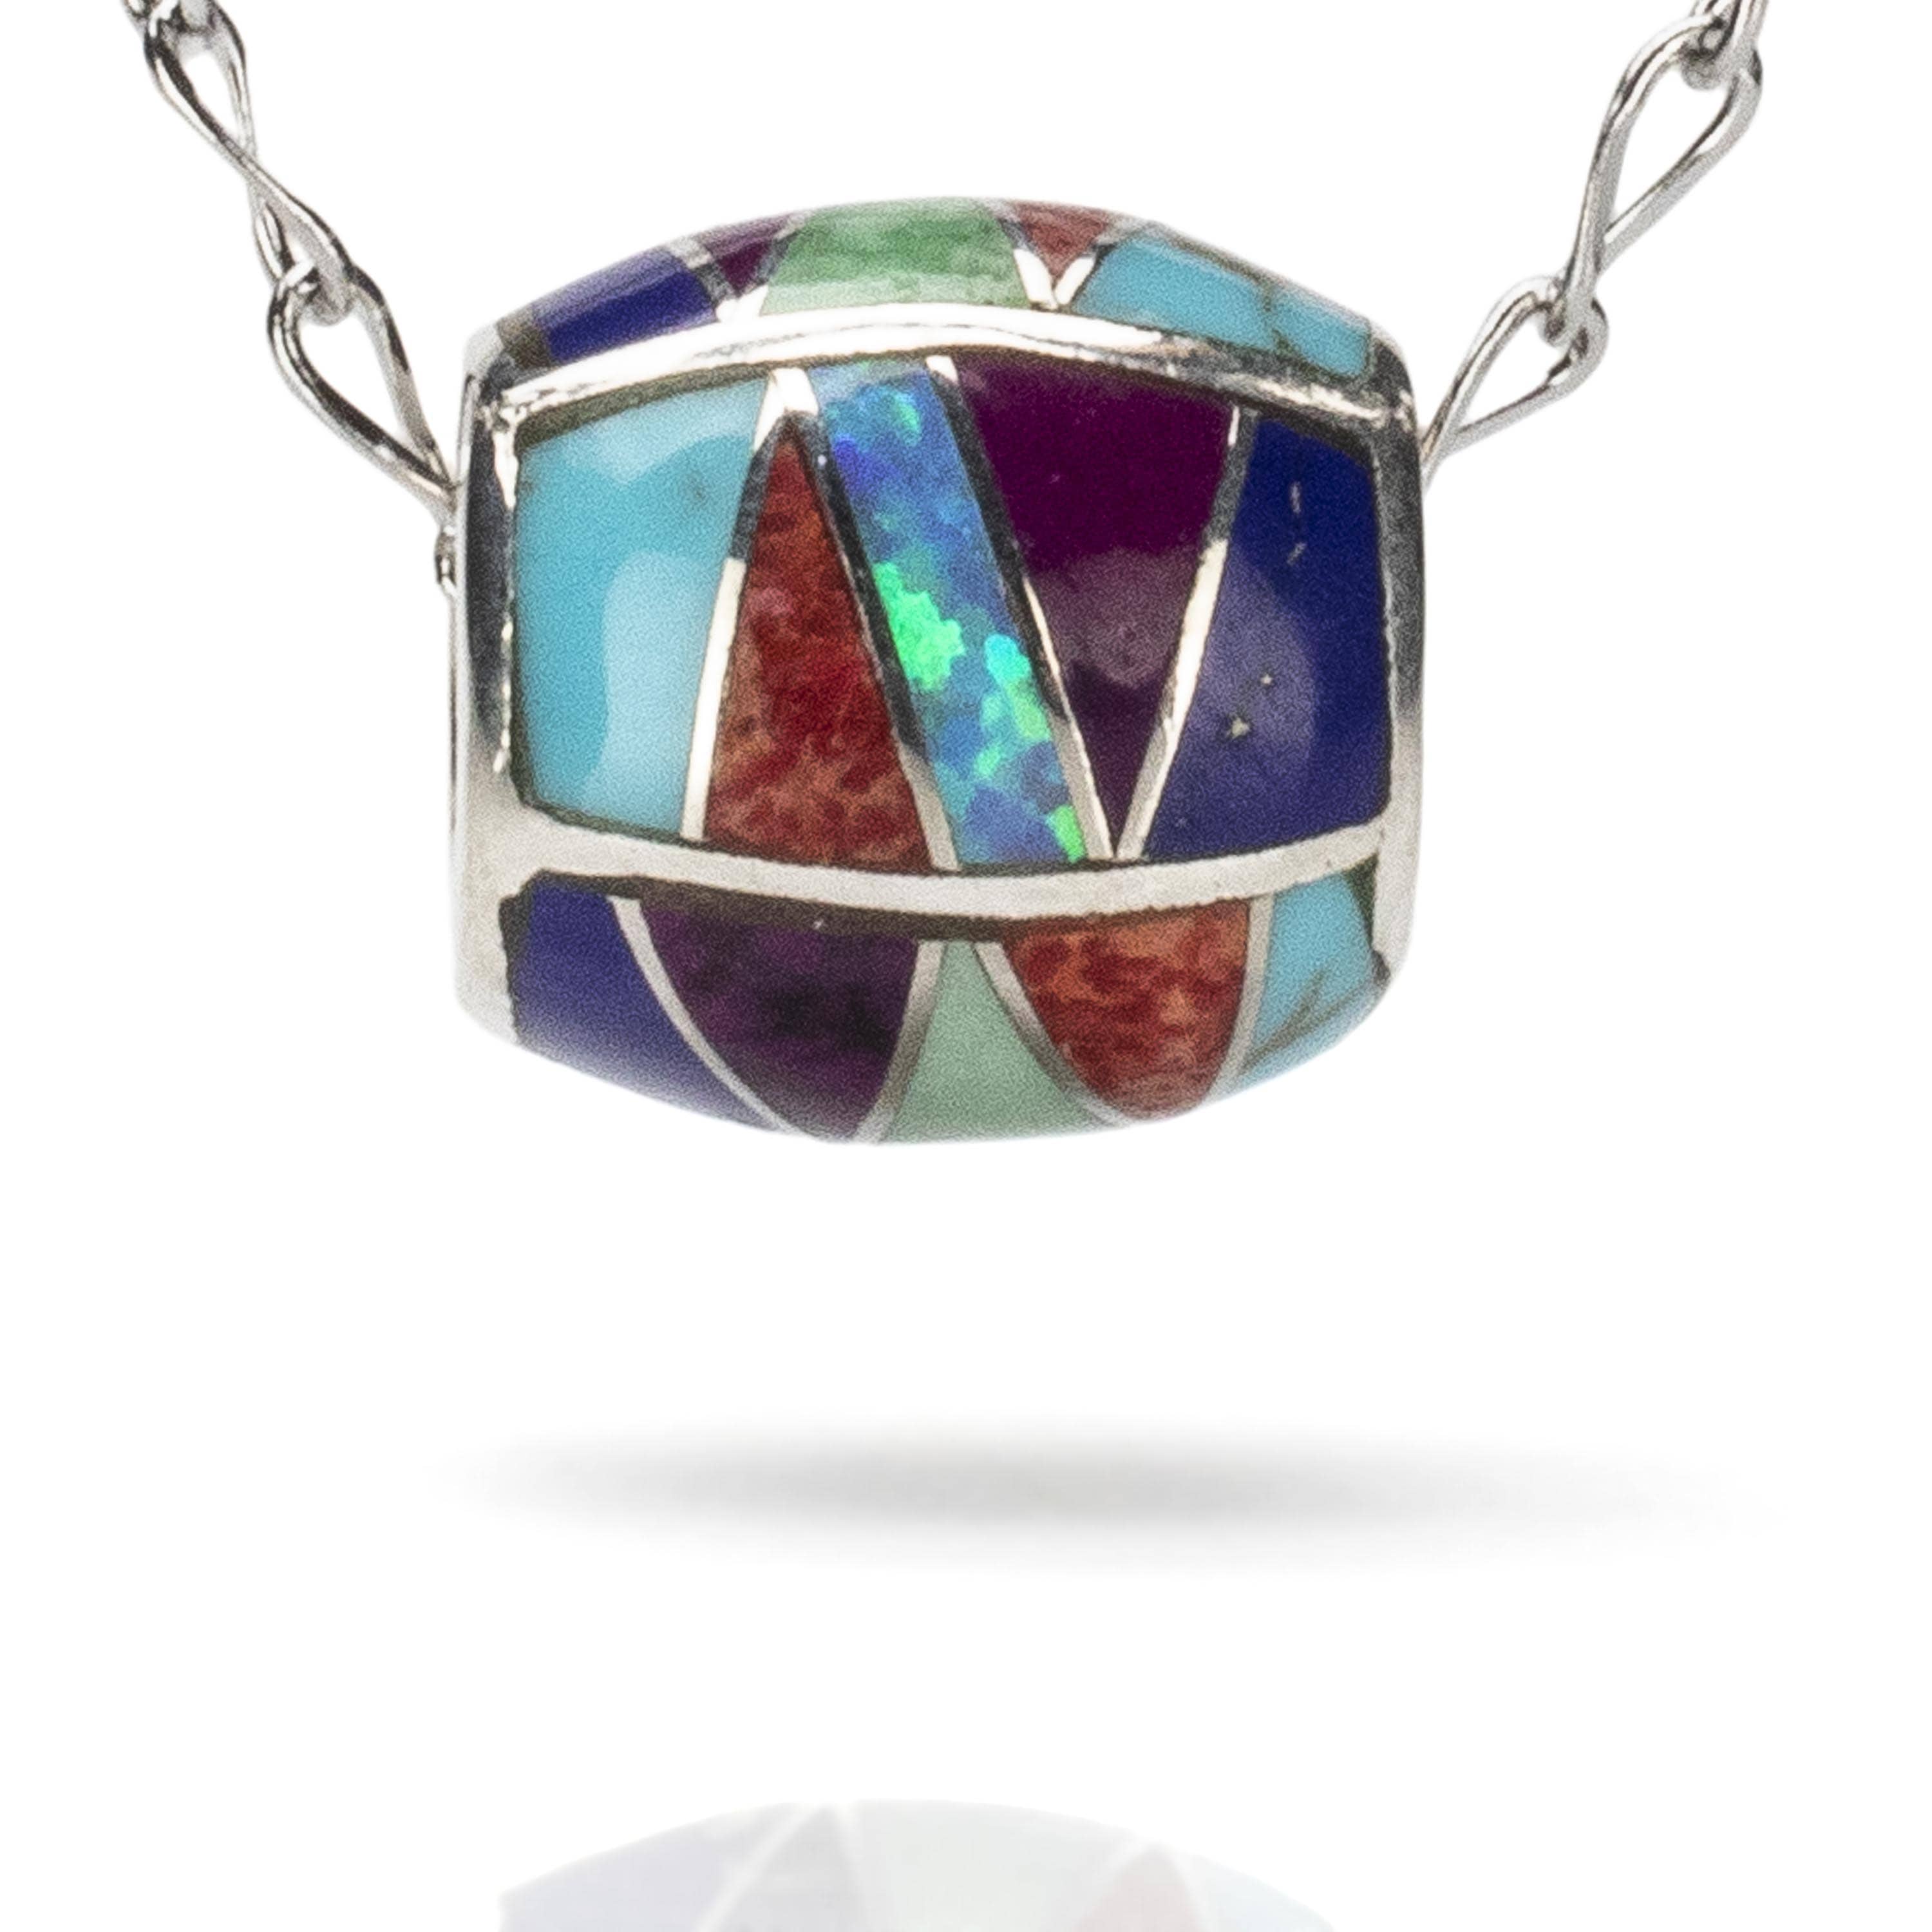 Kalifano Southwest Silver Jewelry Multi Gemstone Pendant Handmade with Sterling Silver and Opal Accent NMN.0570.MT